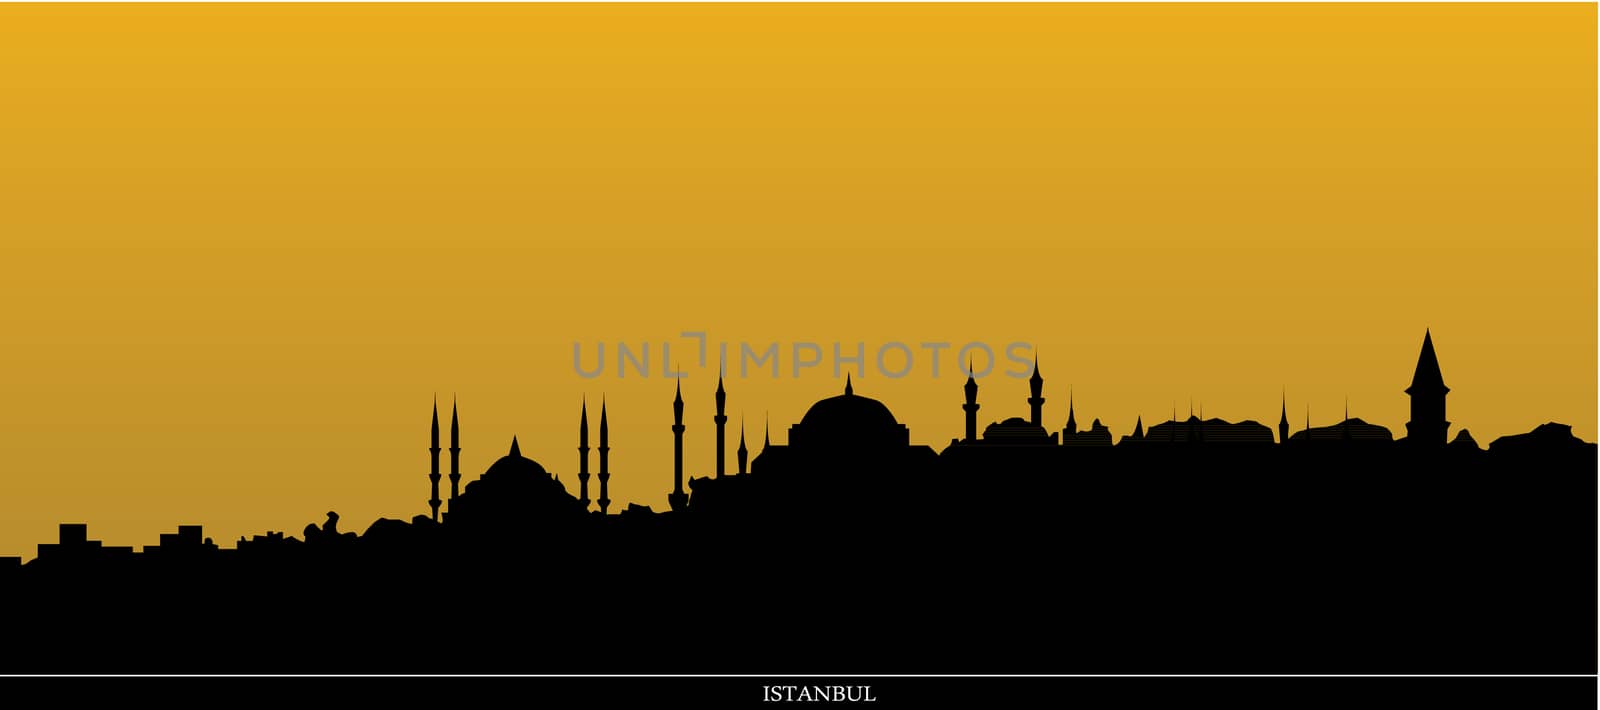 Istanbul skyline by compuinfoto